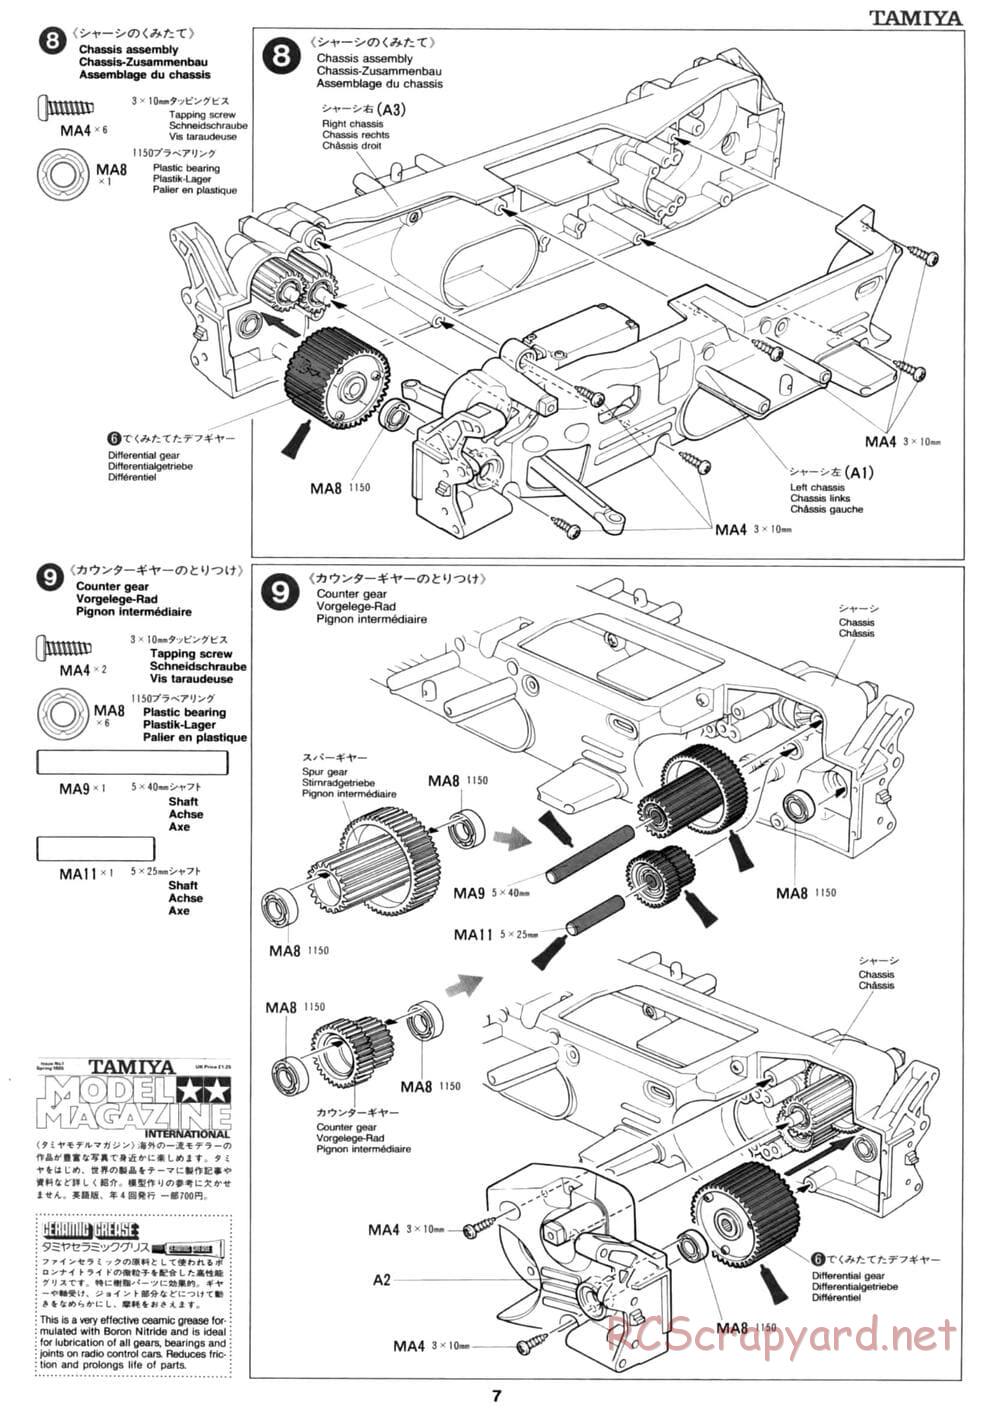 Tamiya - Calsonic Skyline GT-R - TL-01 Chassis - Manual - Page 7